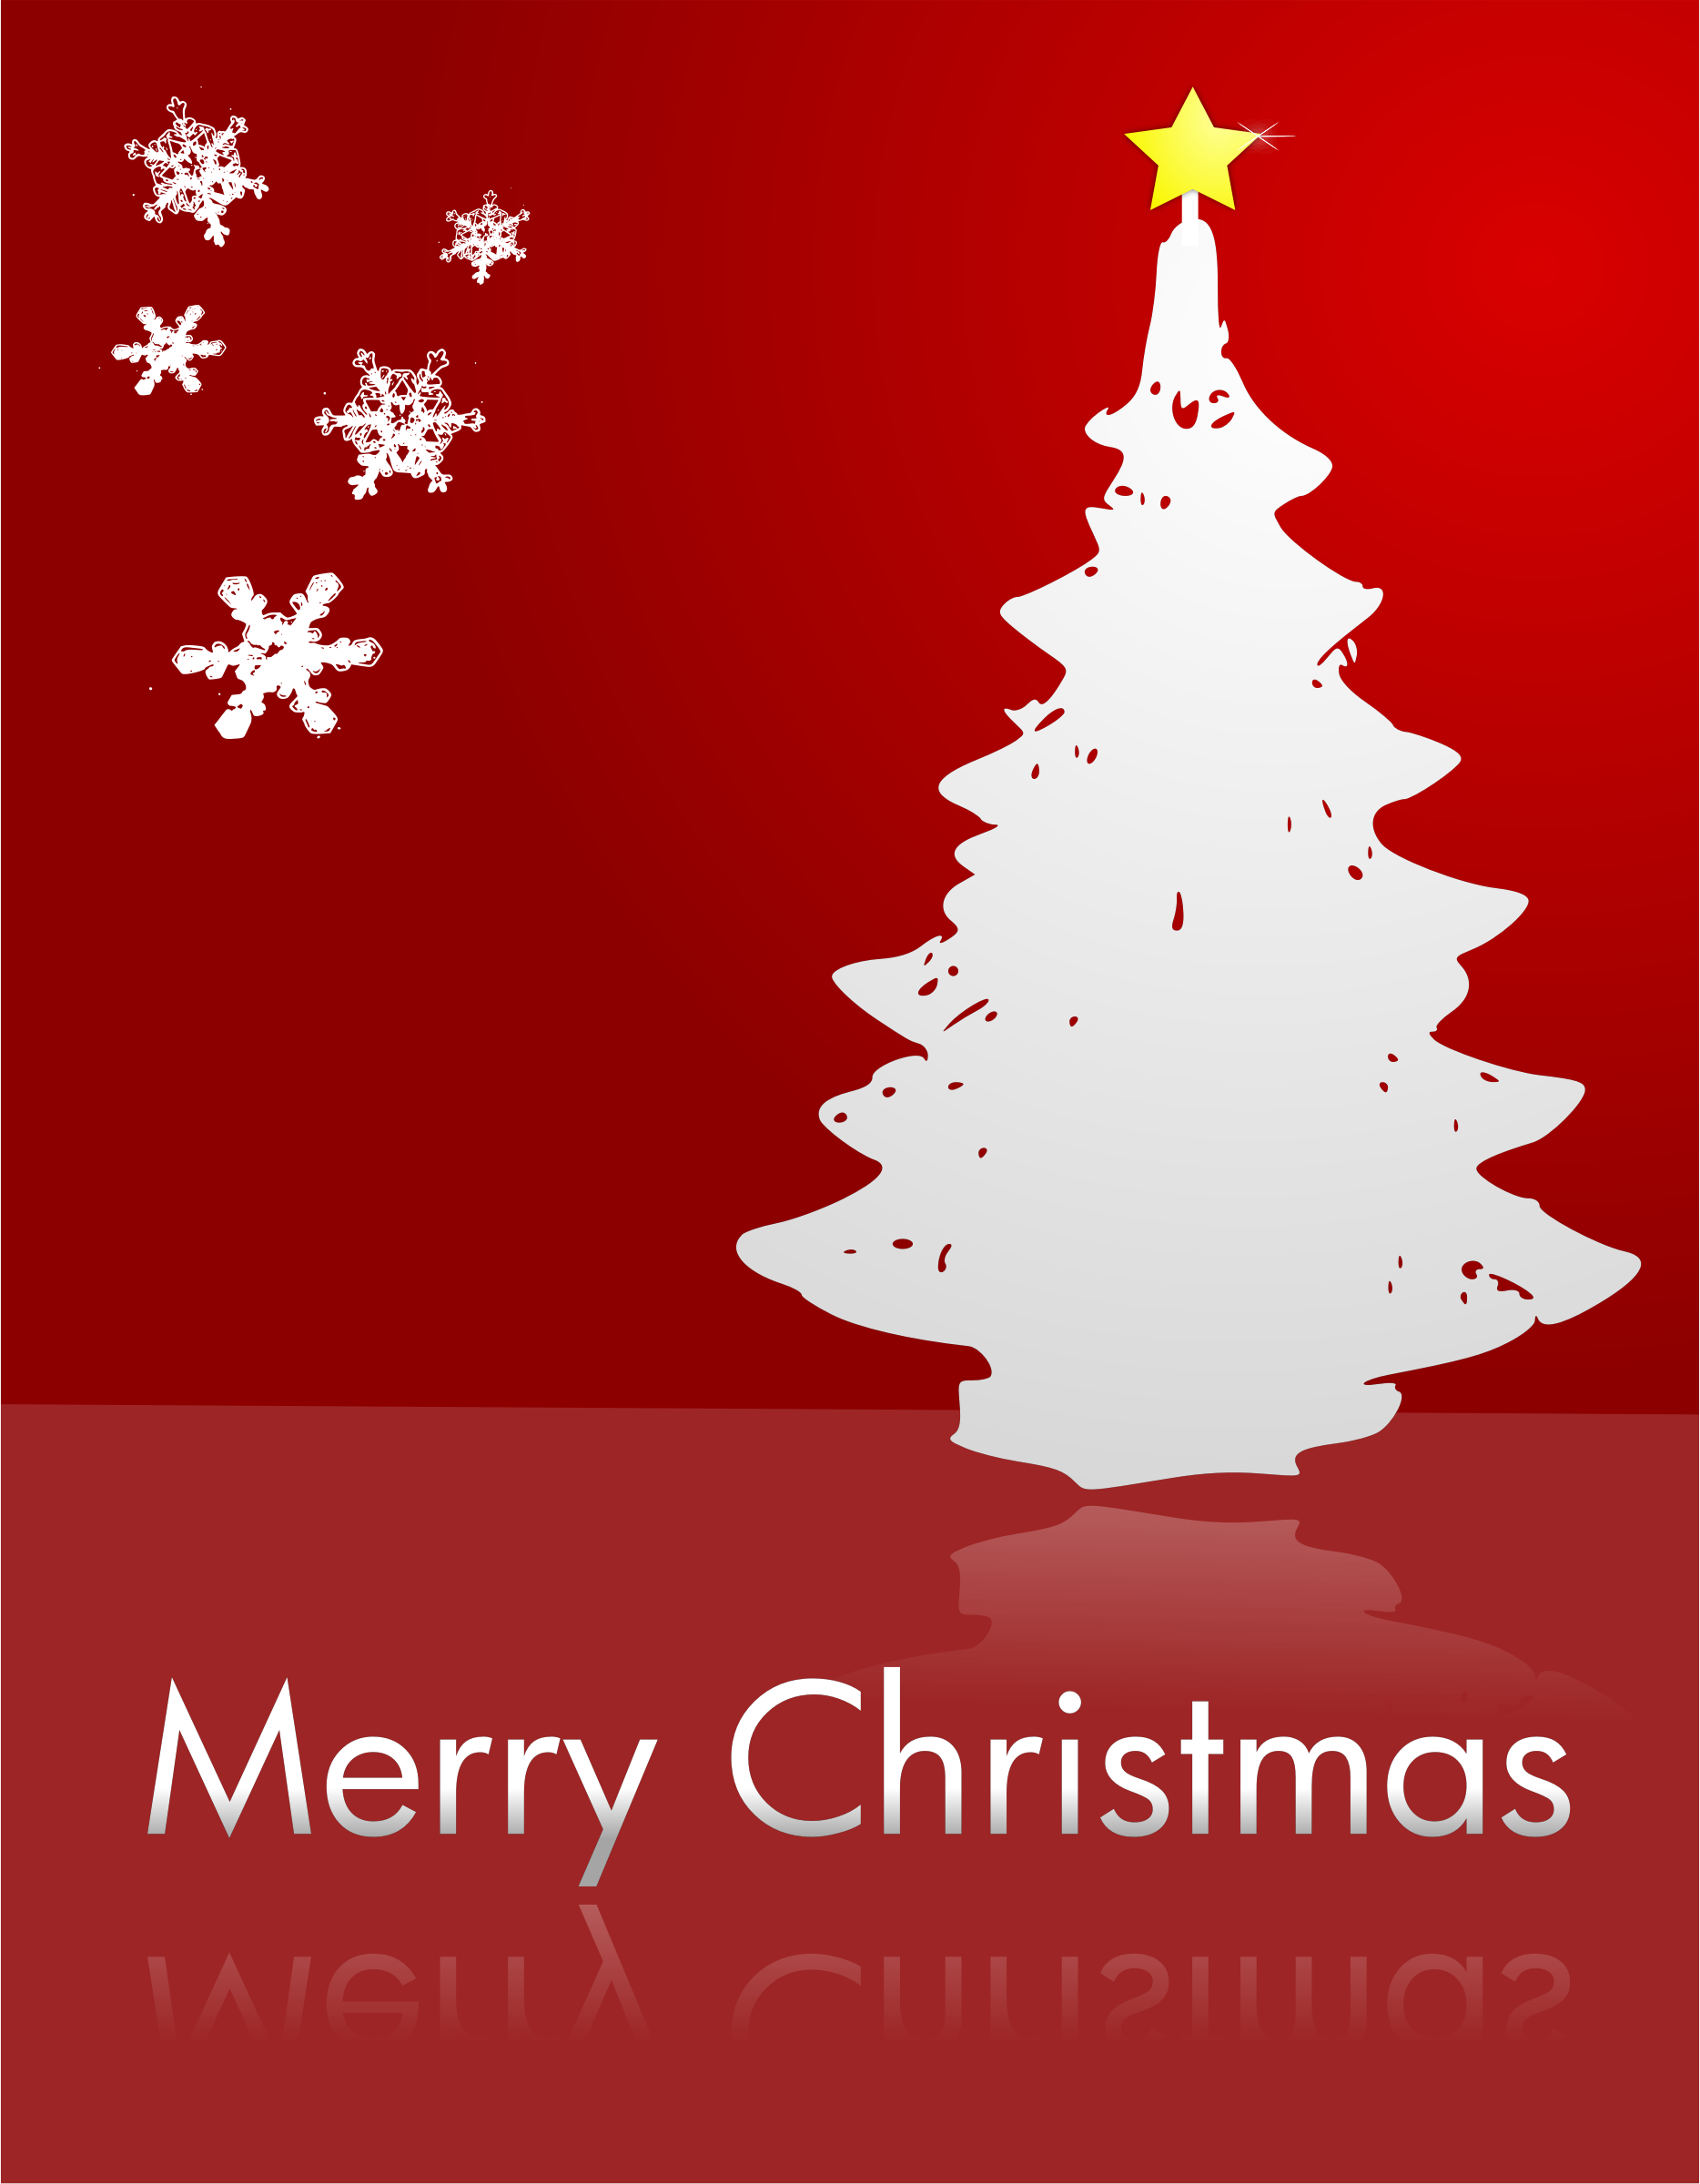 ms office christmas clipart - photo #35